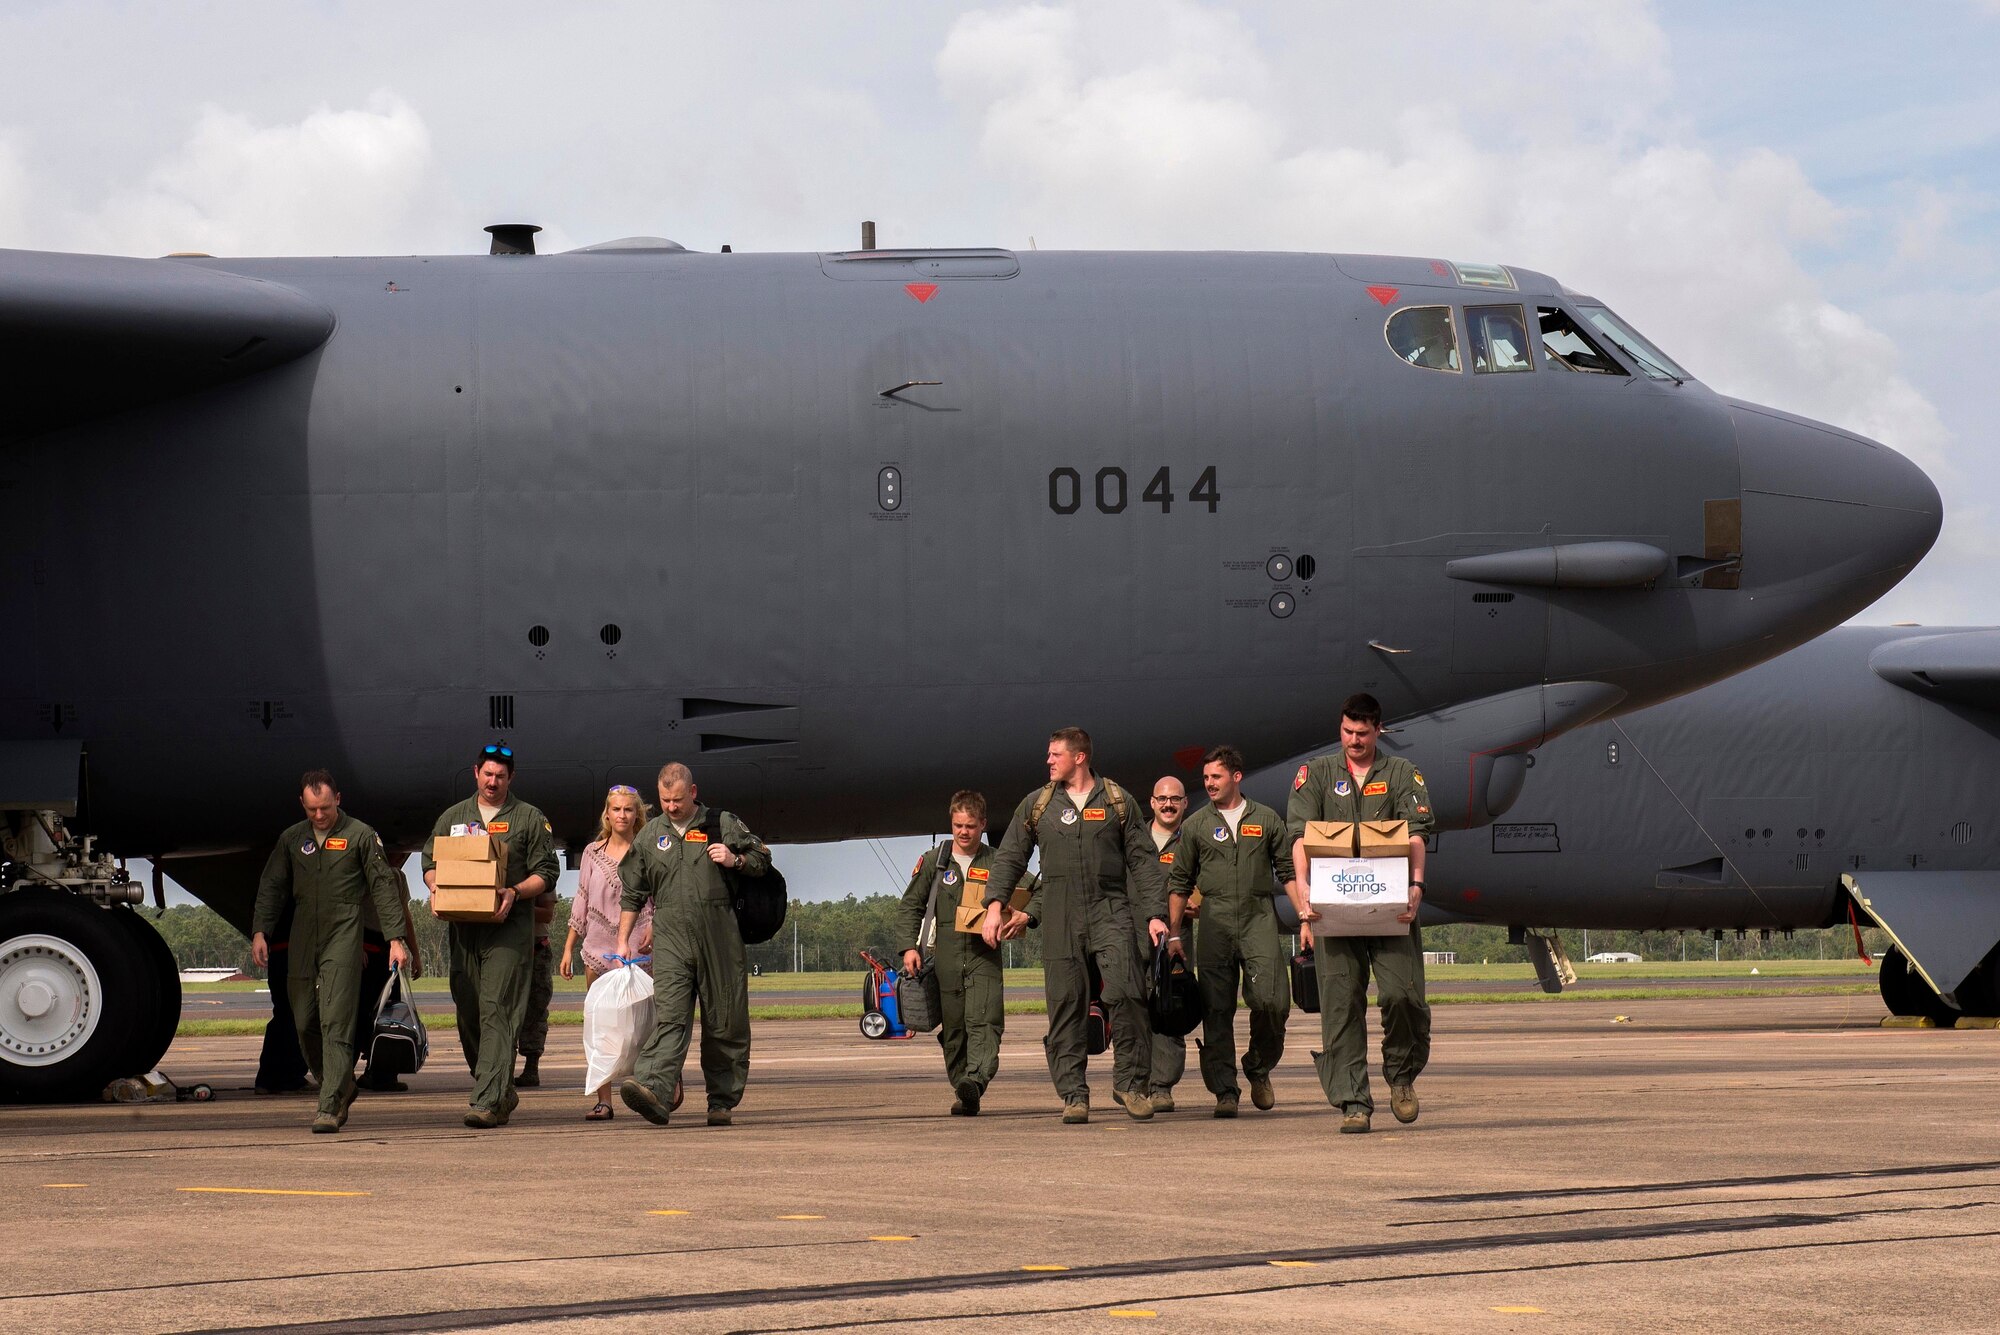 U.S. Airmen assigned to the 23rd Expeditionary Bomb Squadron help pilots and aircrew members unload a B-52 Stratofortress following a sortie in support of Diamond Shield 2019 (DS-19) at Royal Australian Air Force Base Darwin, Australia, March 26, 2019.